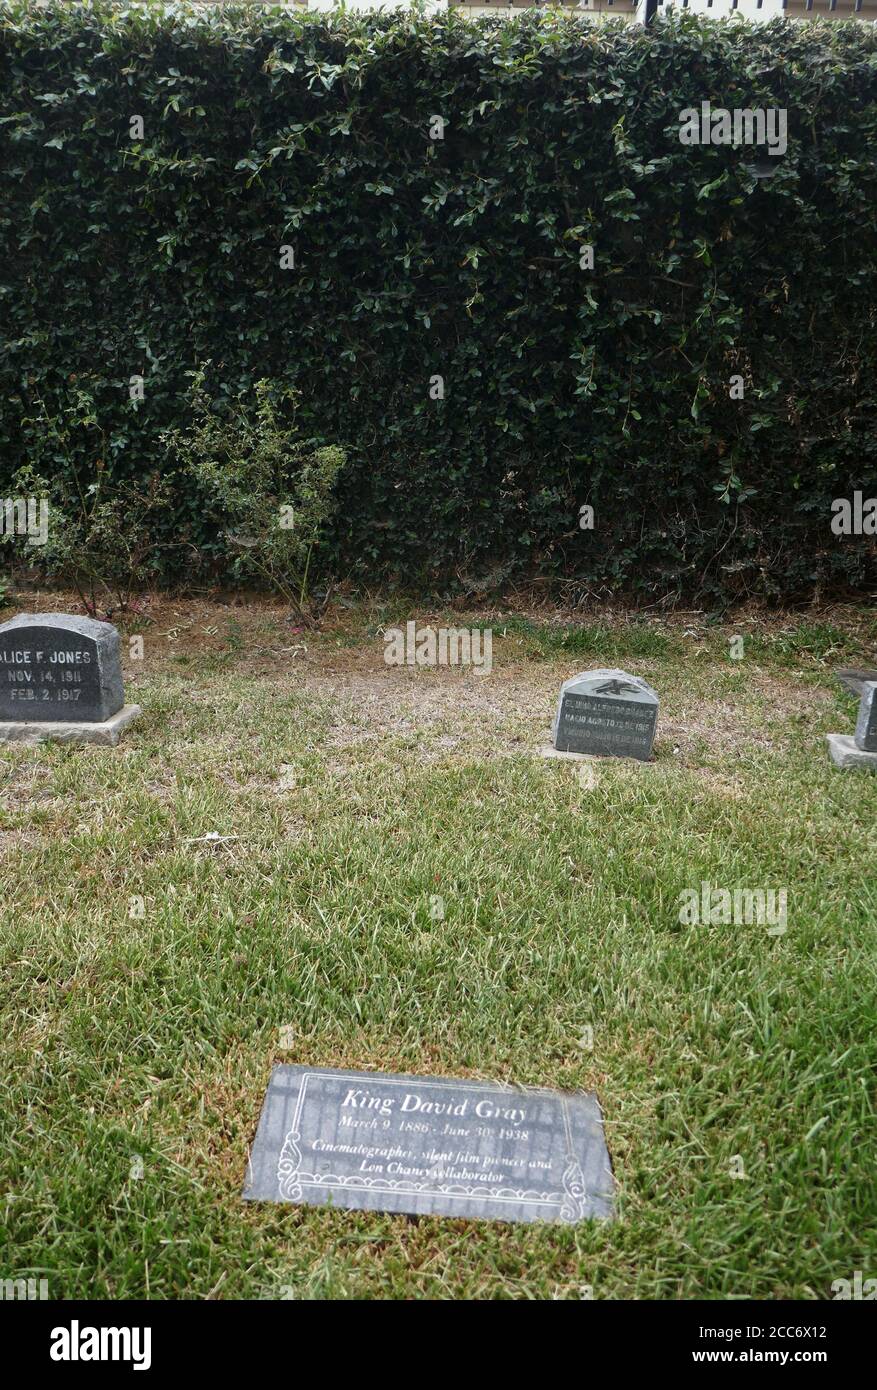 Hollywood, California, USA 17th August 2020 A general view of atmosphere of King David Gray's Grave at Hollywood Forever Cemetery on August 17, 2020 in Hollywood, California, USA. Photo by Barry King/Alamy Stock Photo Stock Photo